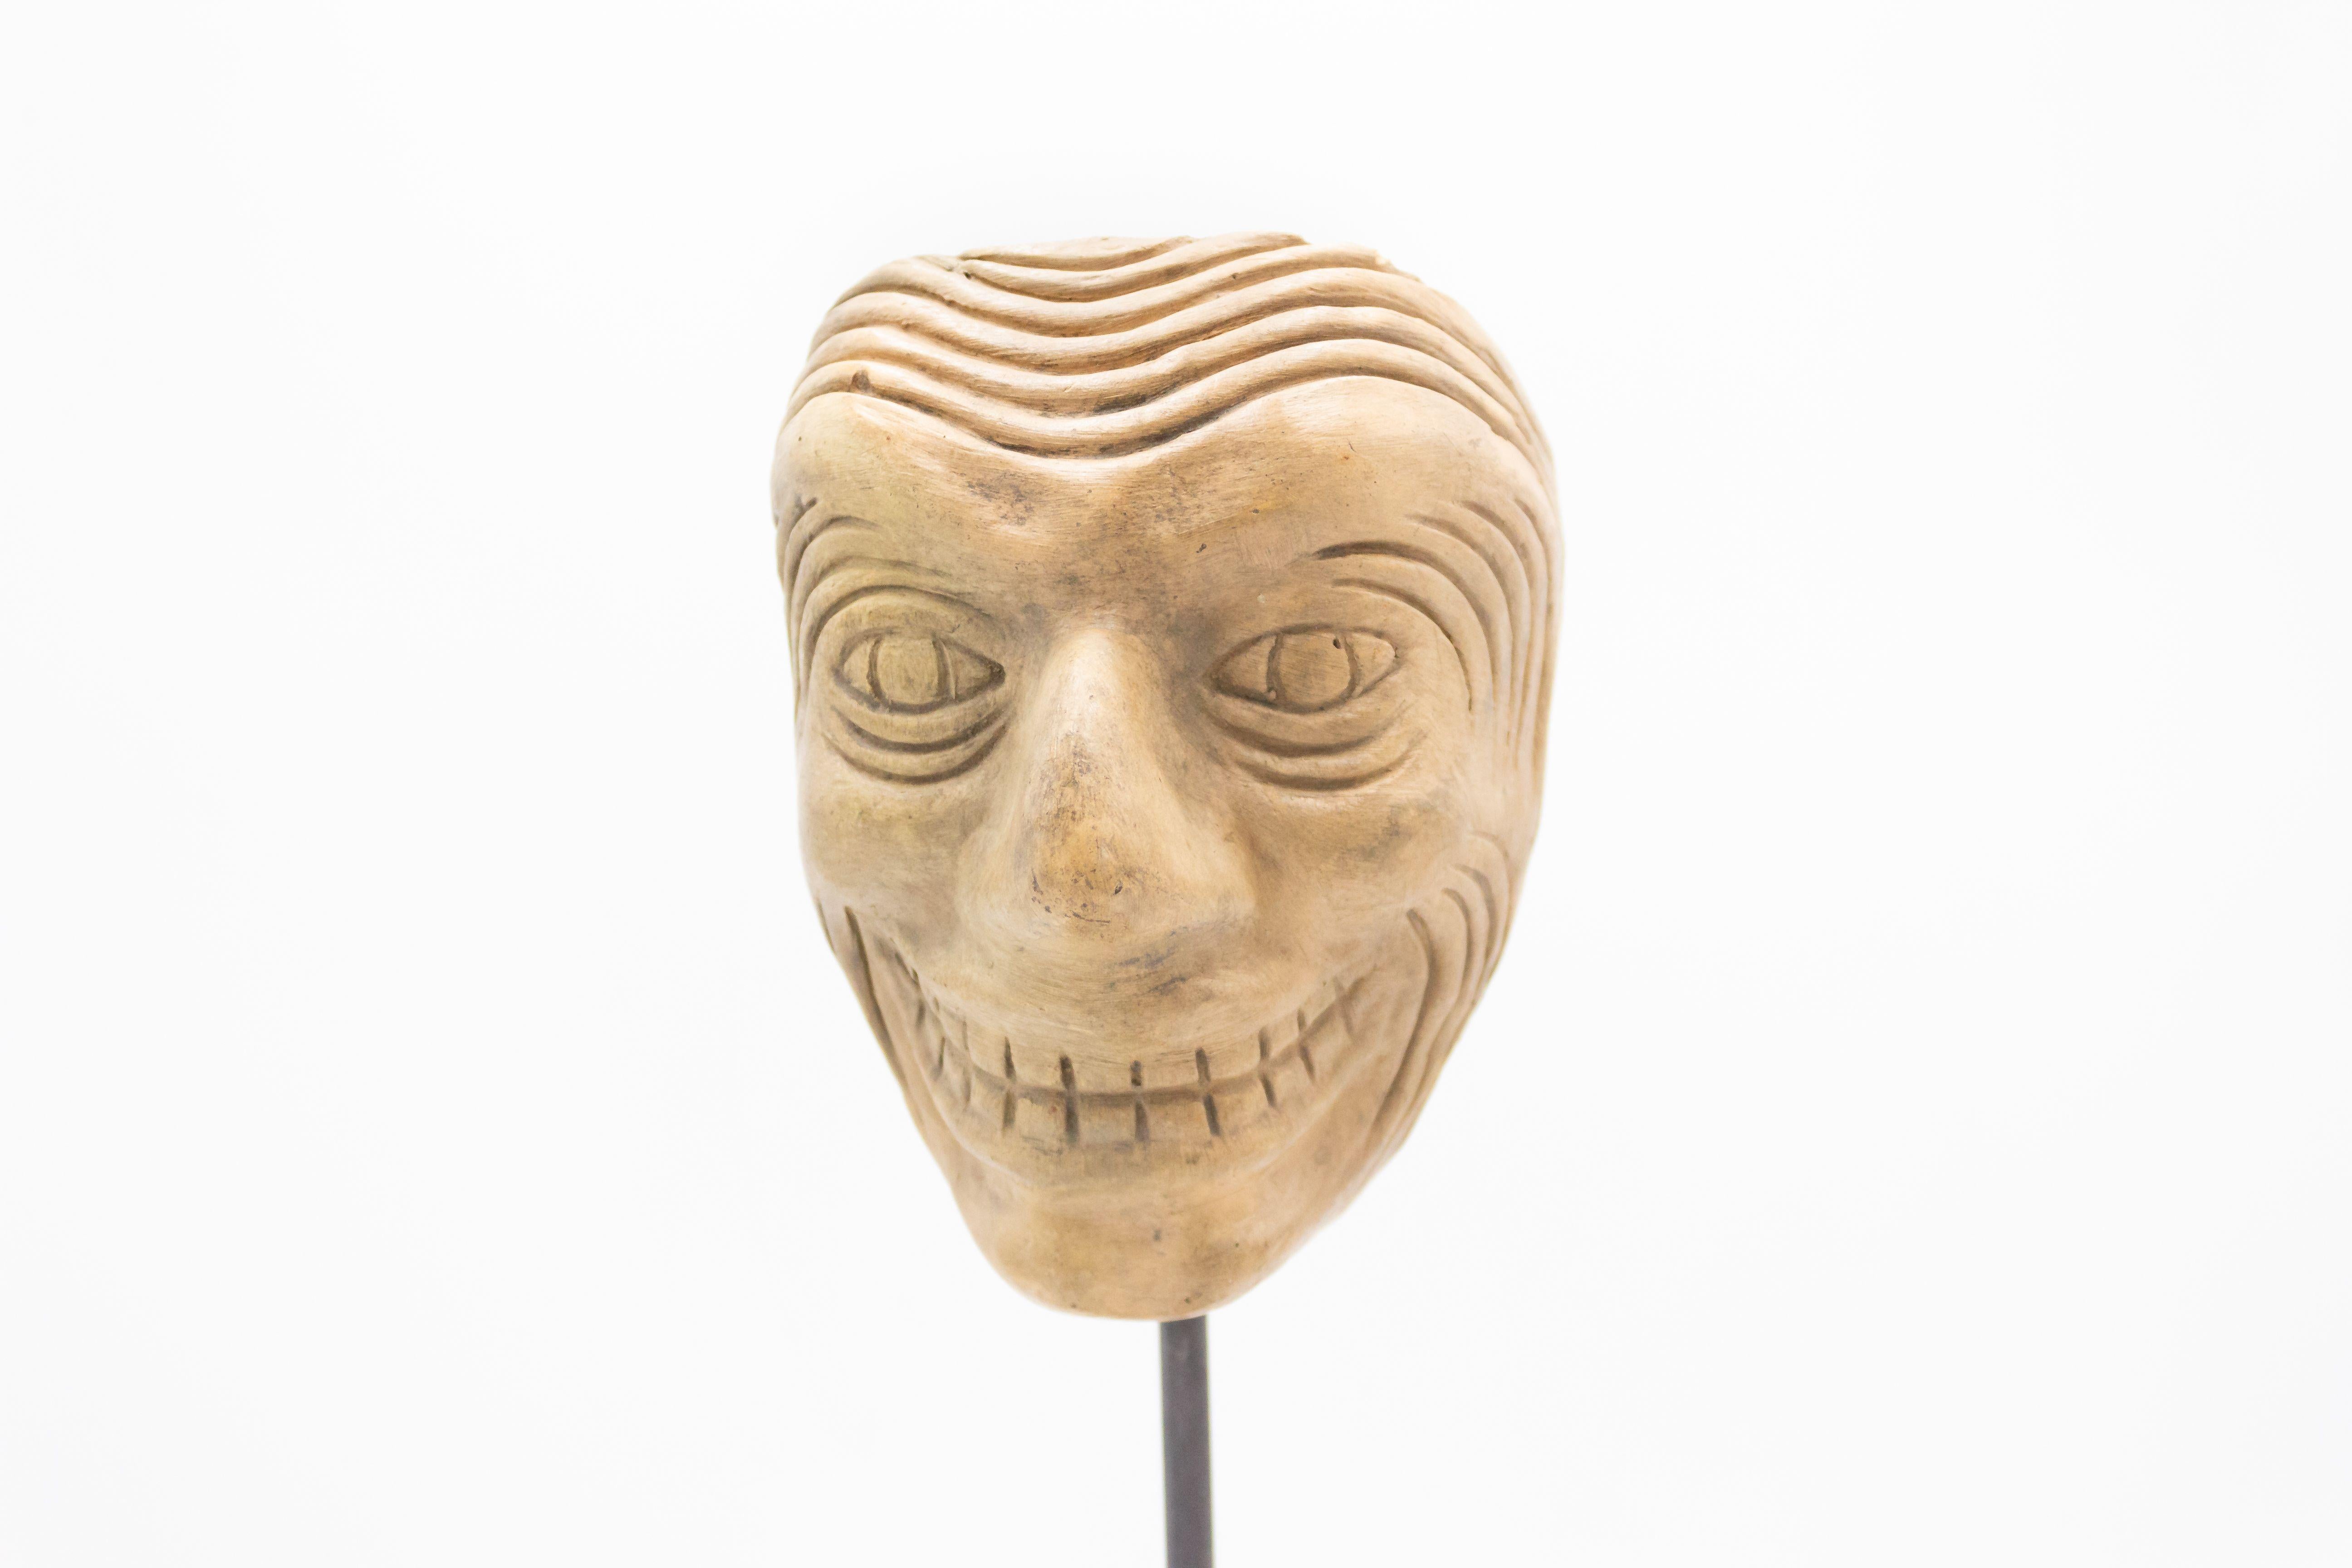 Continental German (late 19th cent) sculpted terra-cotta master mask mold of an insane looking Grotesque face with deep laugh lines displayed on a square black marble base stand (part of a 39 piece collection).
       